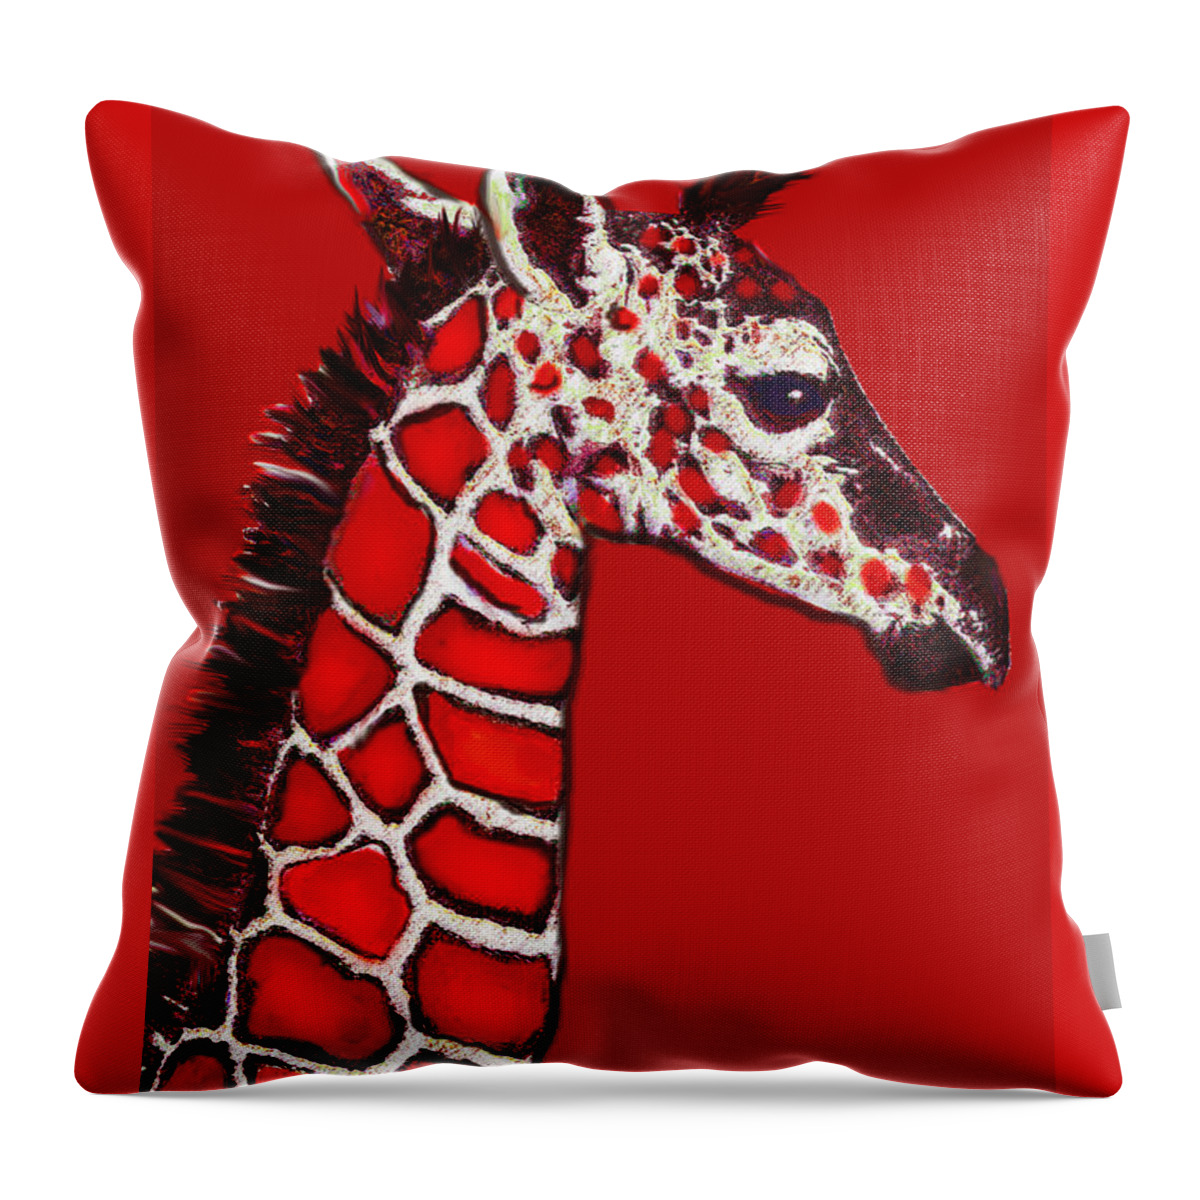 Giraffe Throw Pillow featuring the digital art Baby Giraffe In Red Black And White by Jane Schnetlage